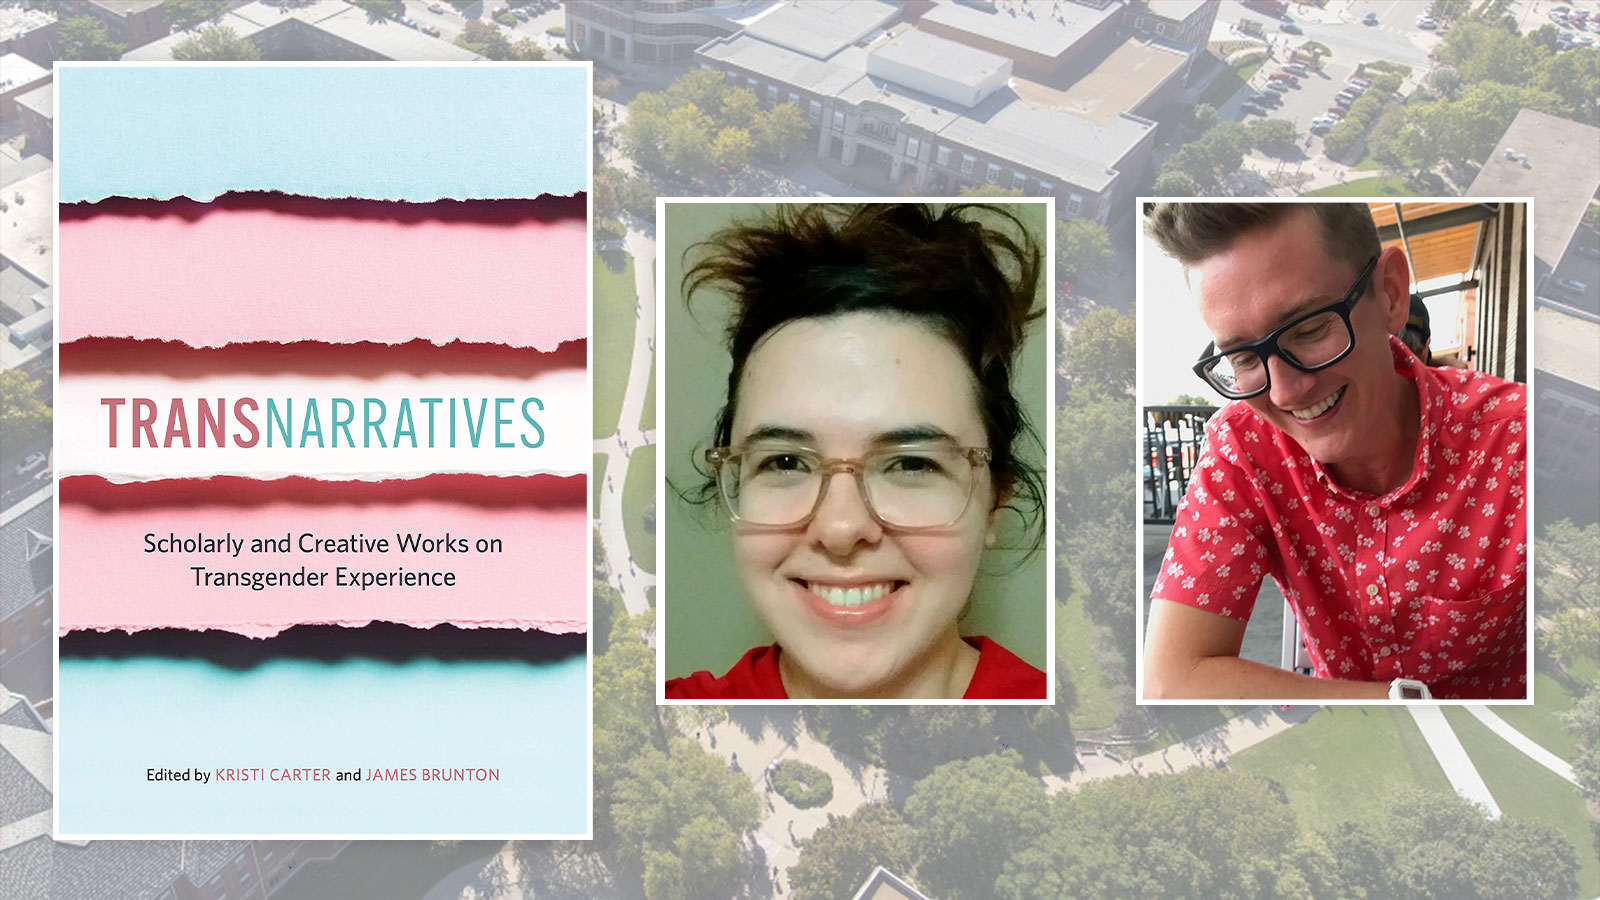 Kristi Carter, James Brunton, and the cover of TransNarratives; links to news story